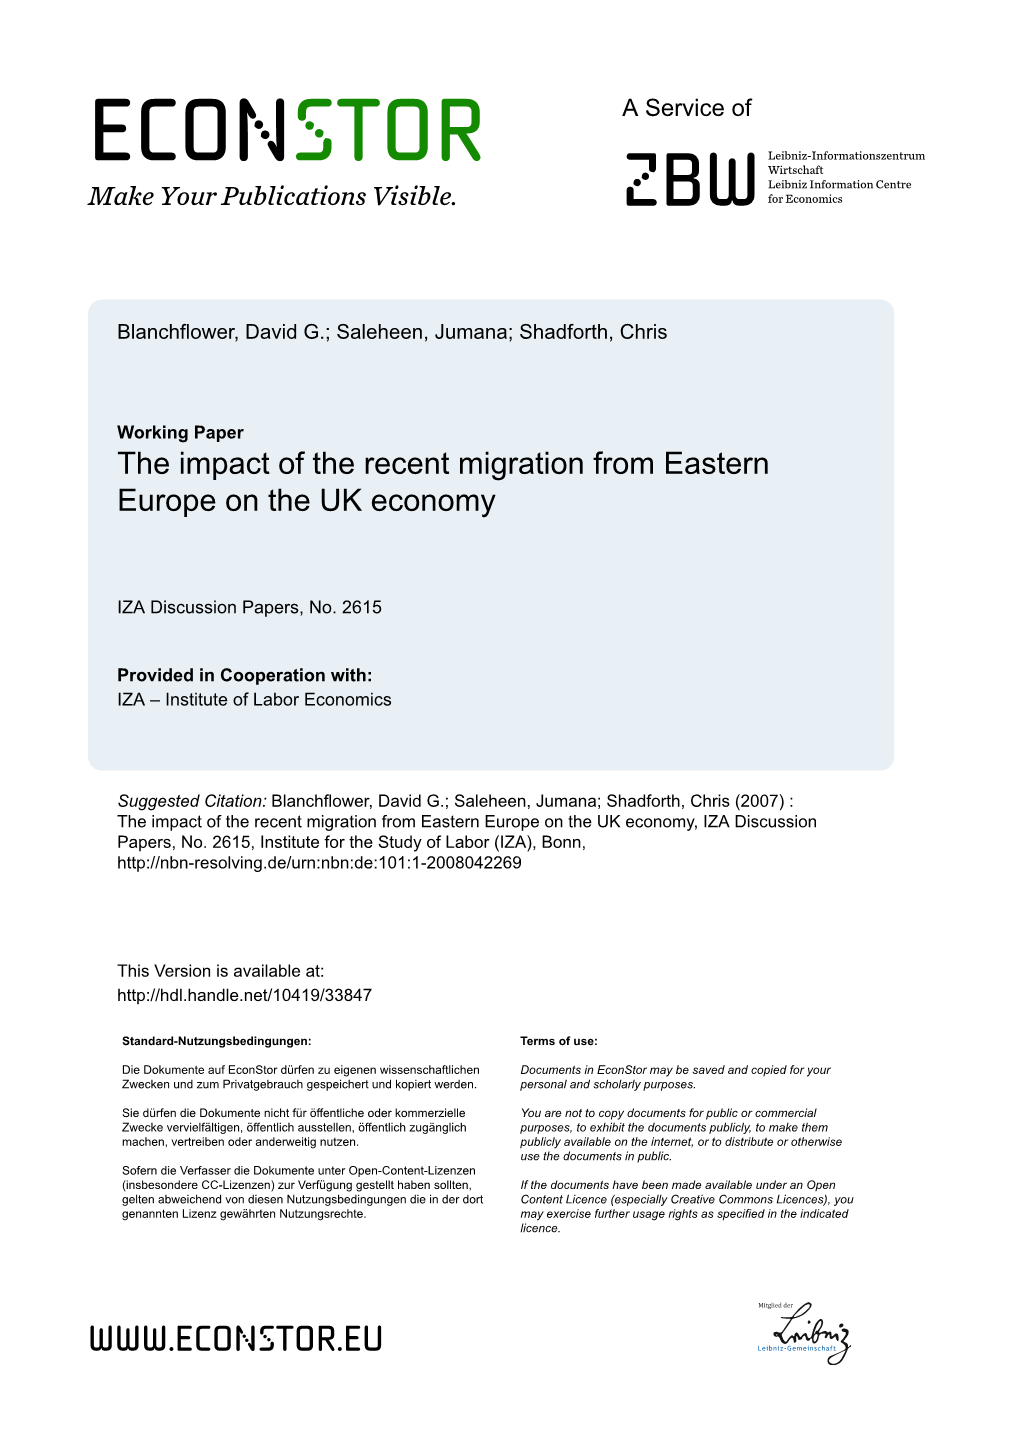 The Impact of the Recent Migration from Eastern Europe on the UK Economy